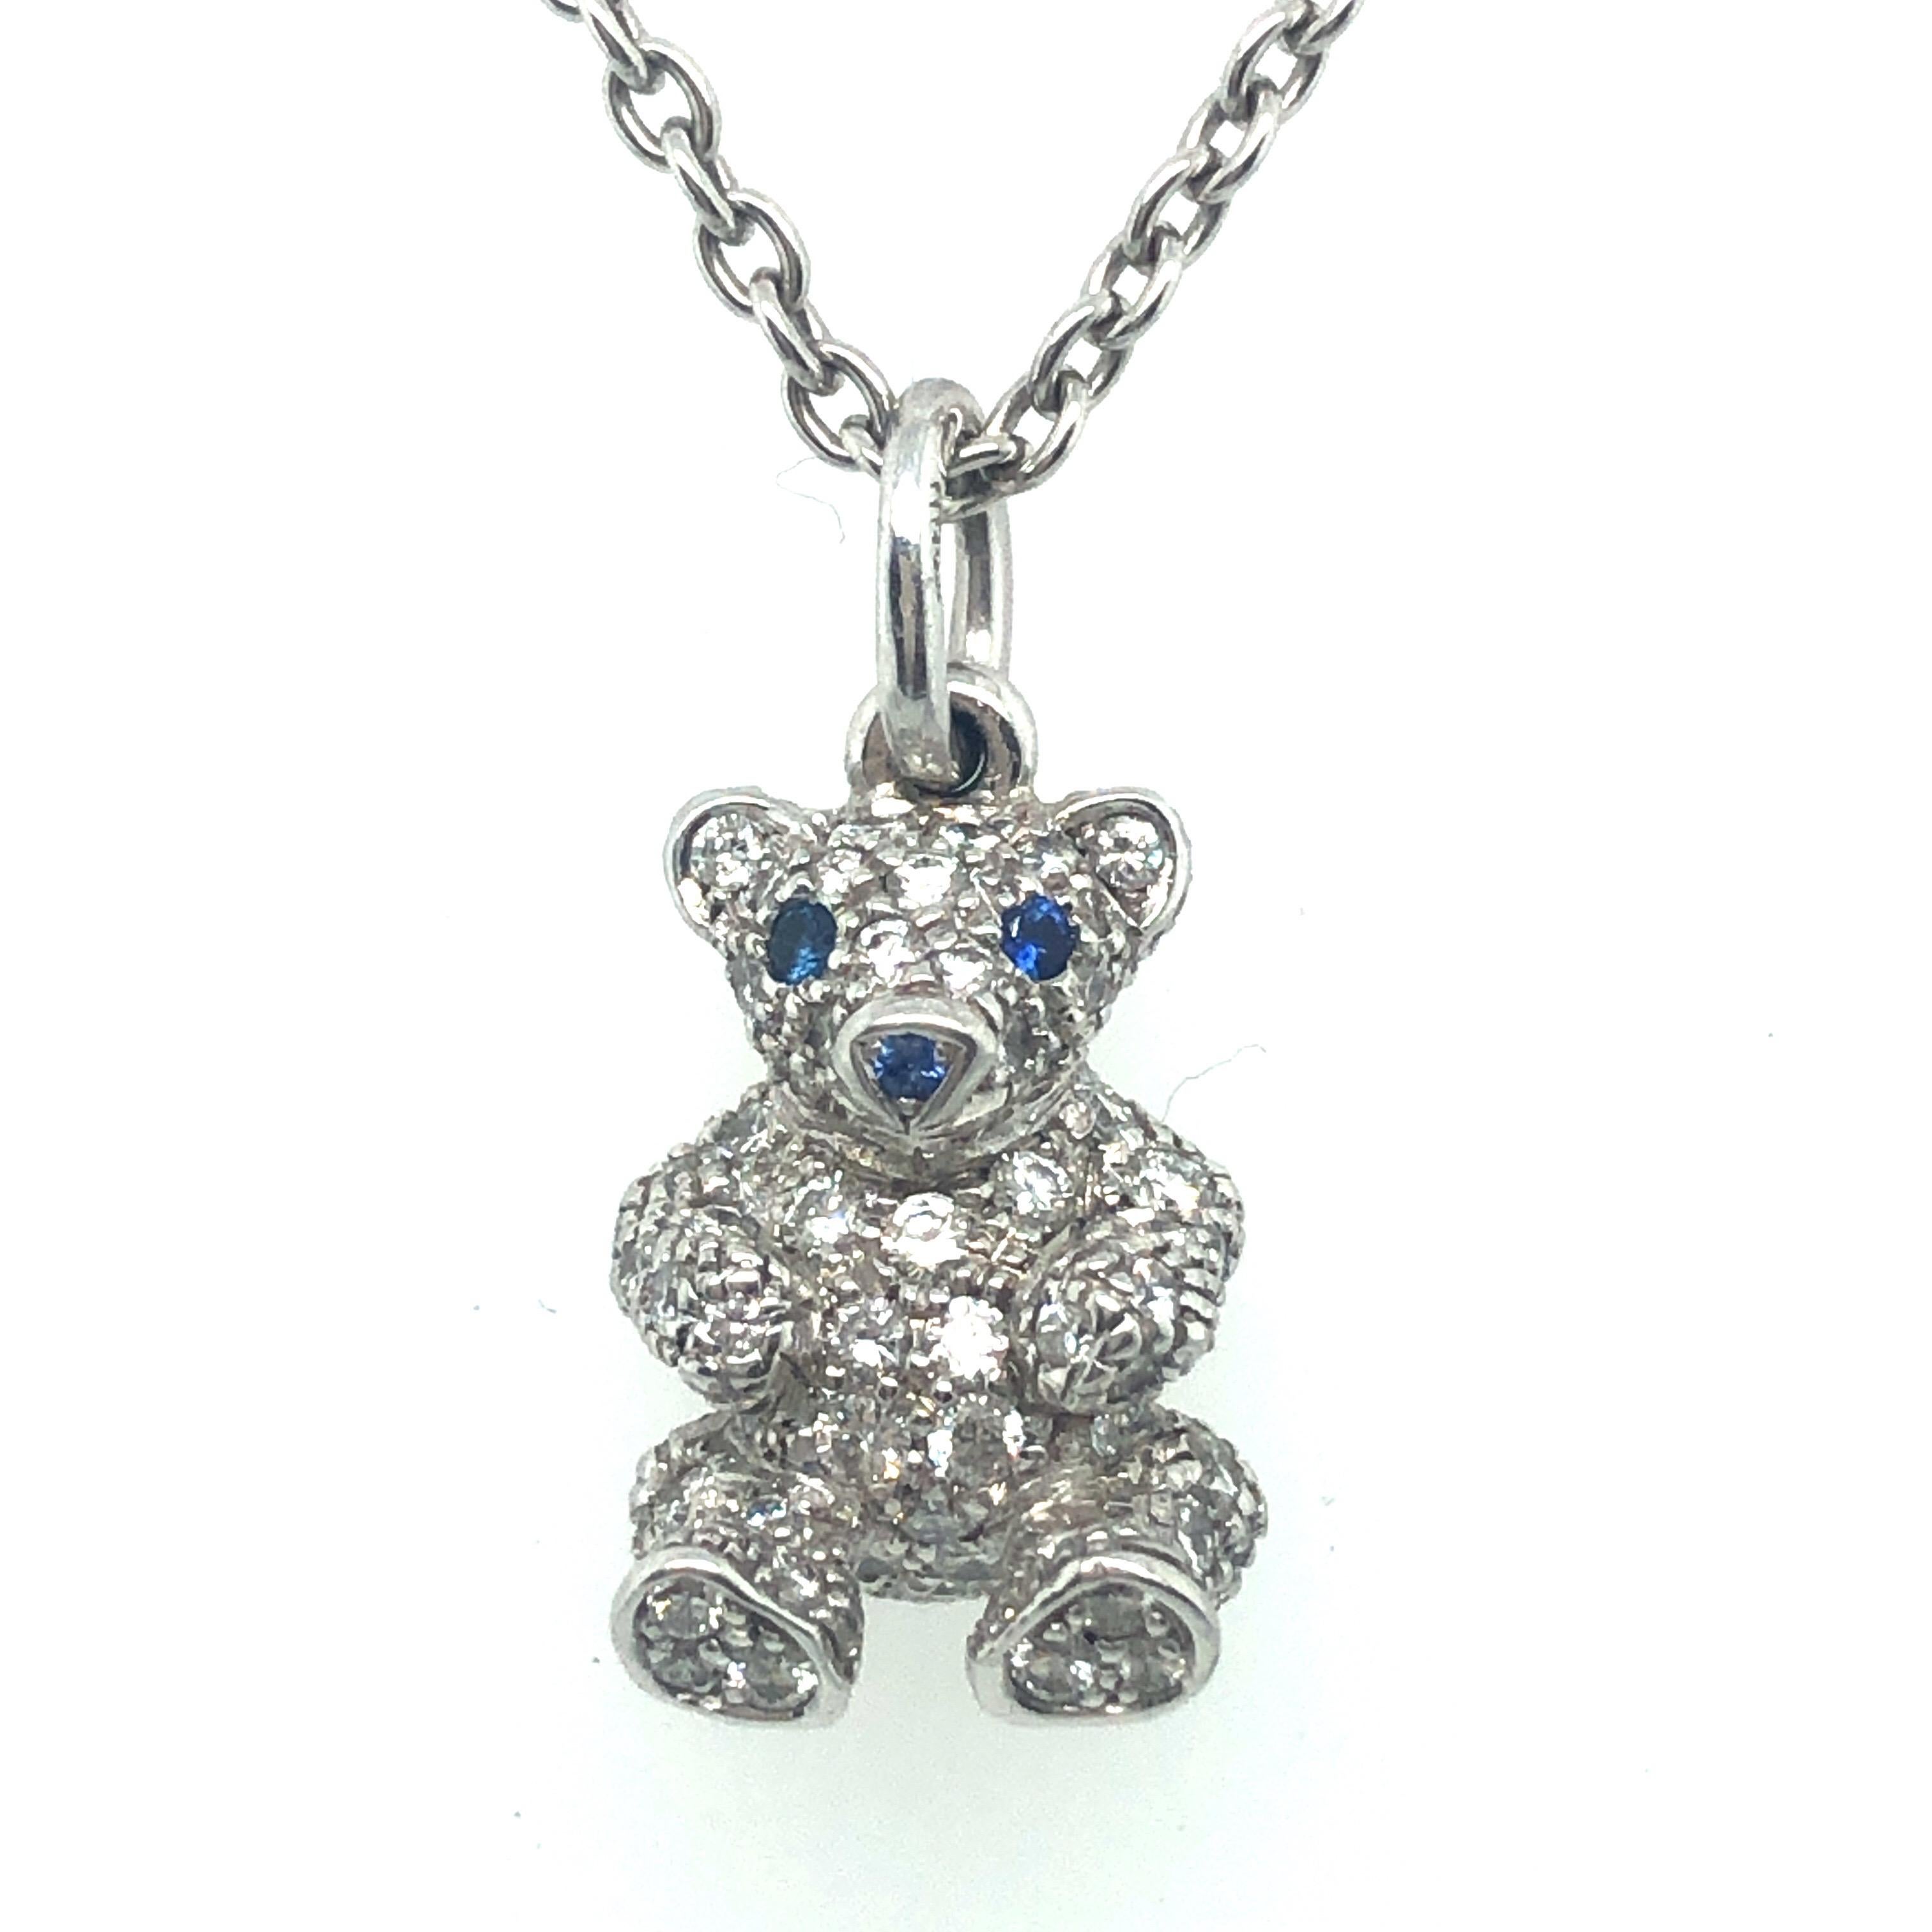 Absolutely adorable 18 karat white gold diamond and sapphire teddy bear pendant with chain.
The bear pendant is crafted in 18 karat white gold and entirely pave-set with 113 brilliant-cut diamonds totalling circa 1.7 carats. The eyes and the snout